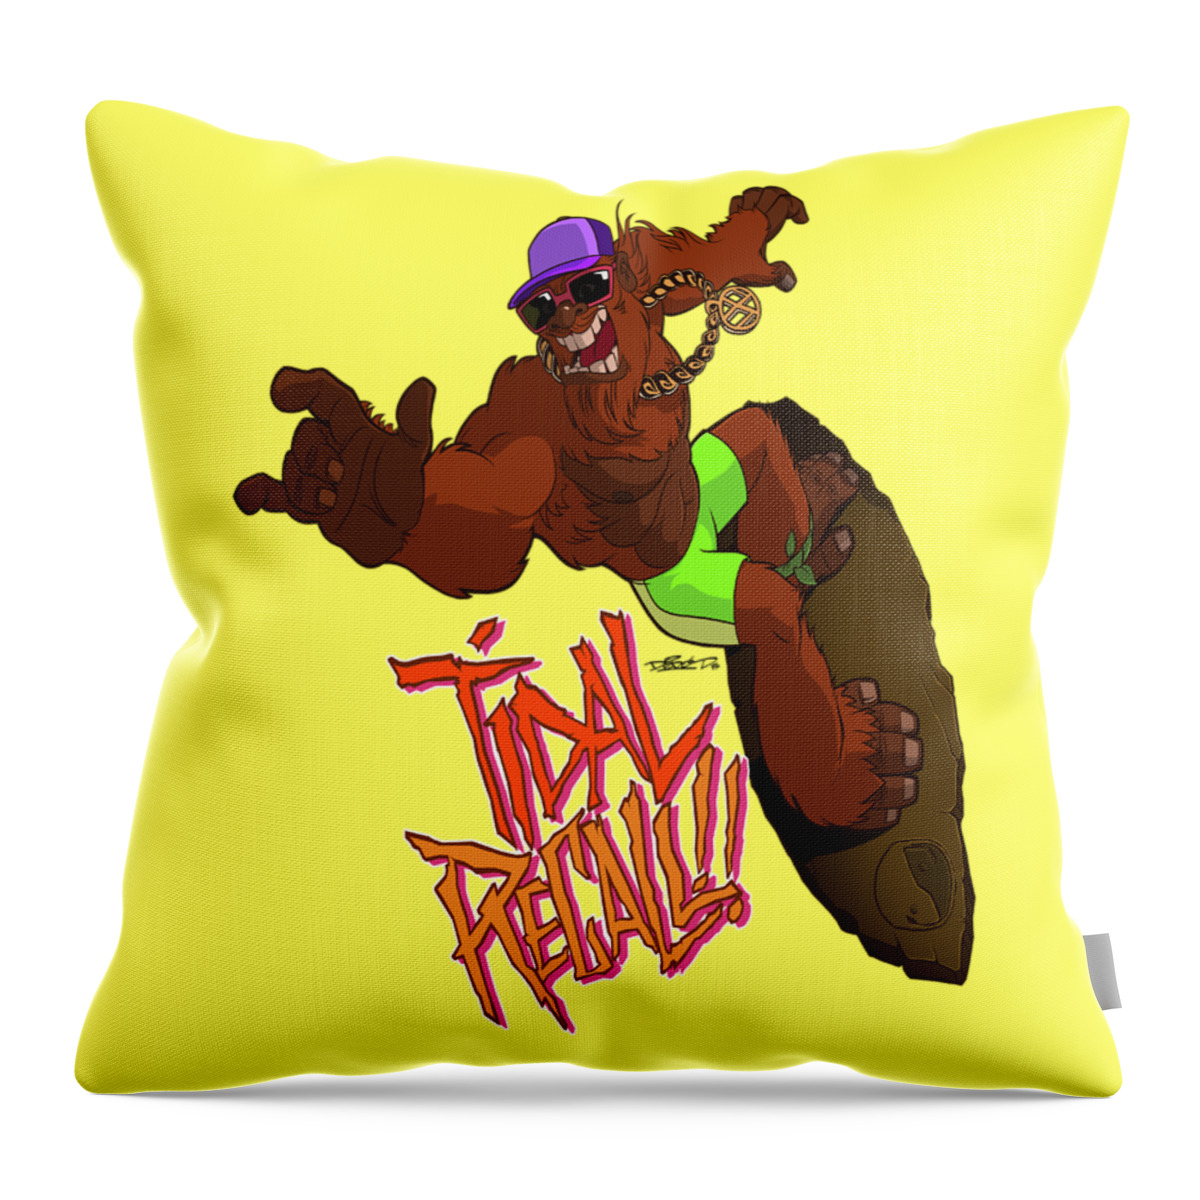 Surf Throw Pillow featuring the drawing Tidal Recall by Nelson Dedos Garcia